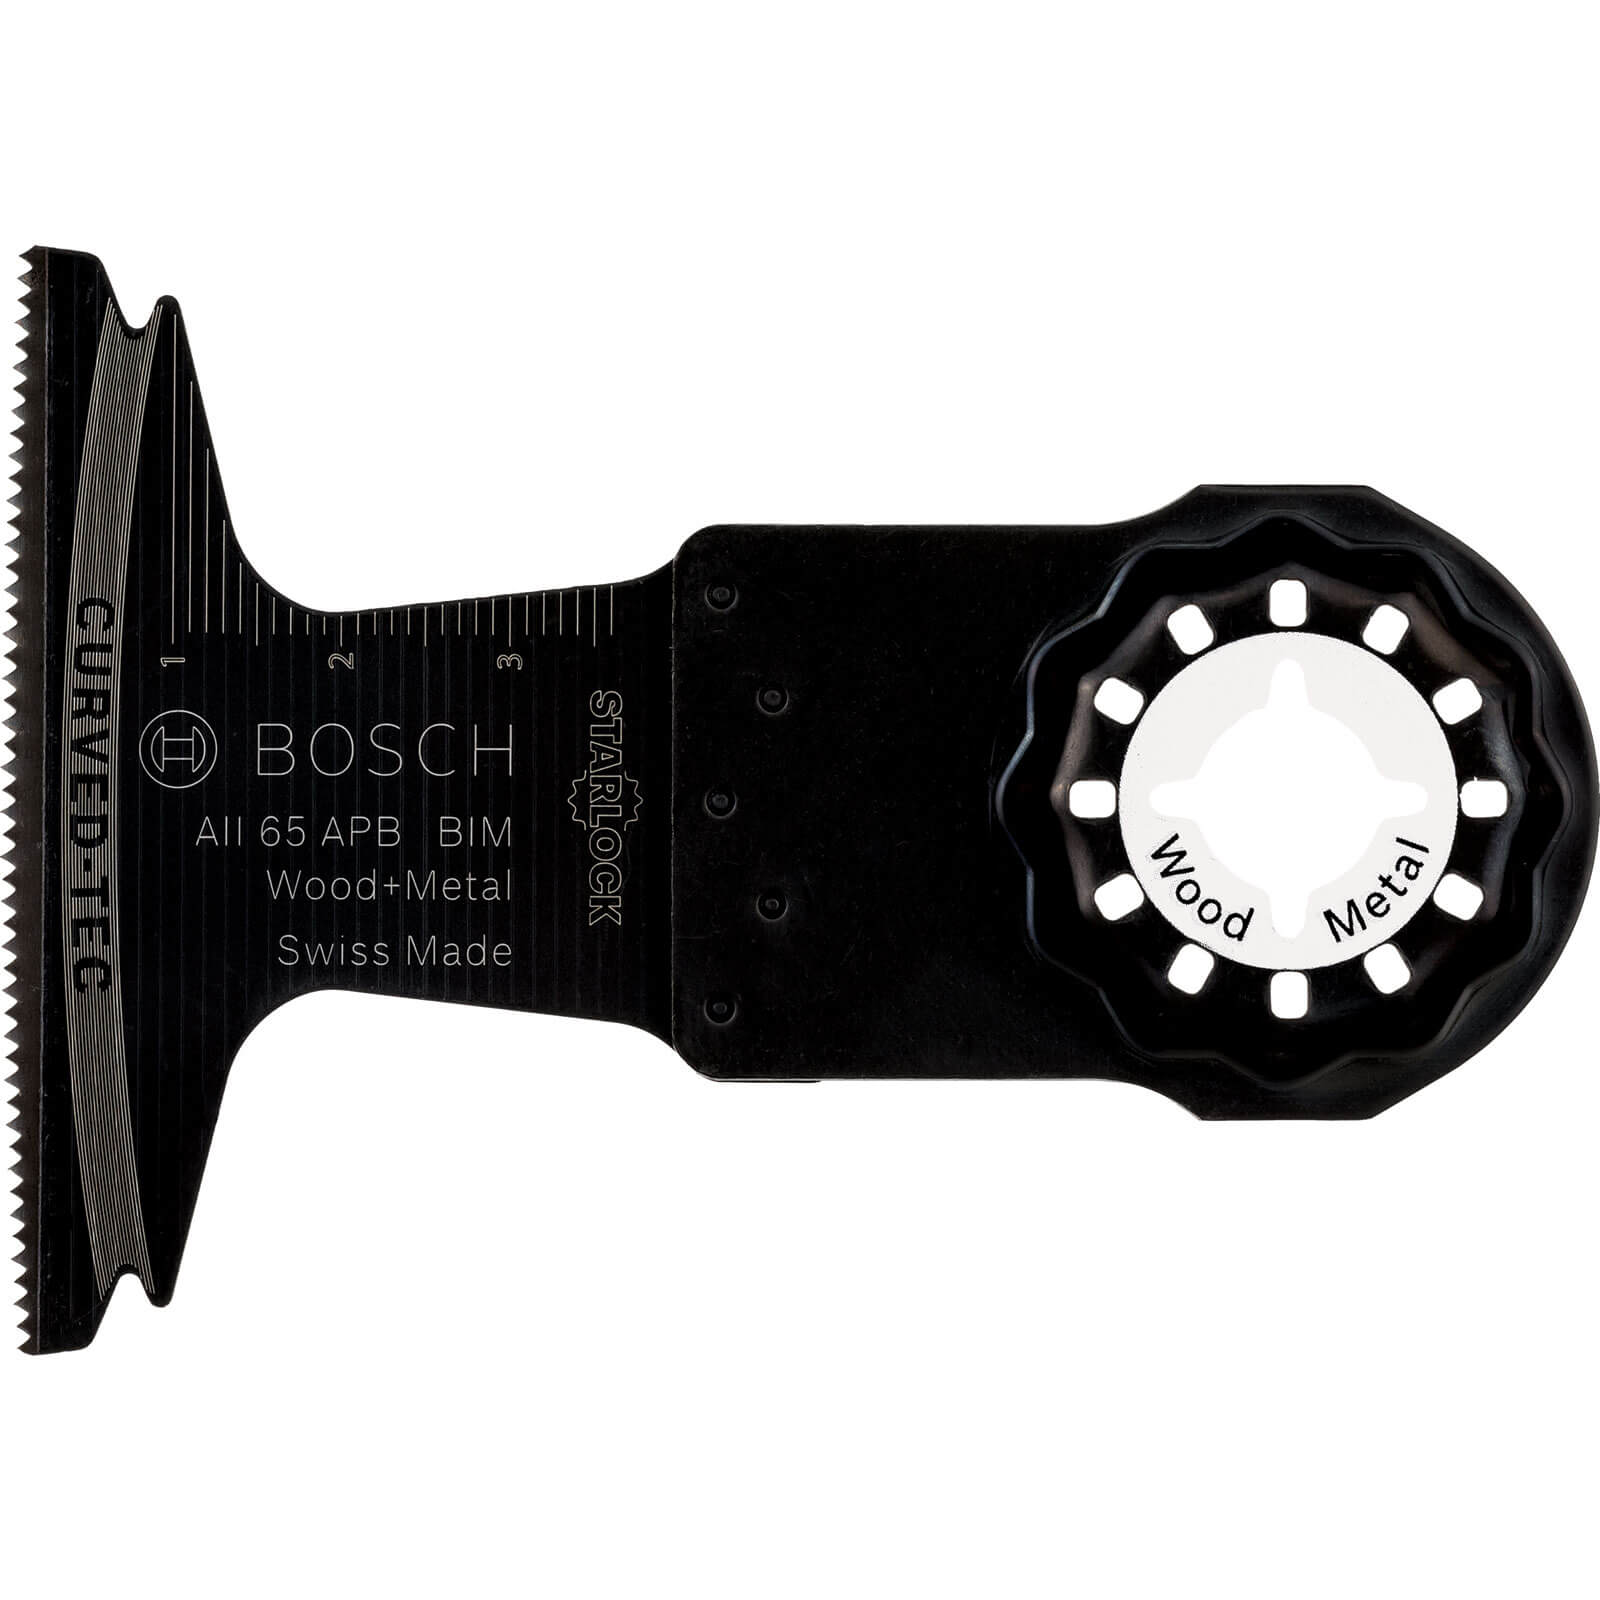 Image of Bosch All 65 APB Metal and Wood Oscillating Multi Tool Plunge Saw Blade 65mm Pack of 5